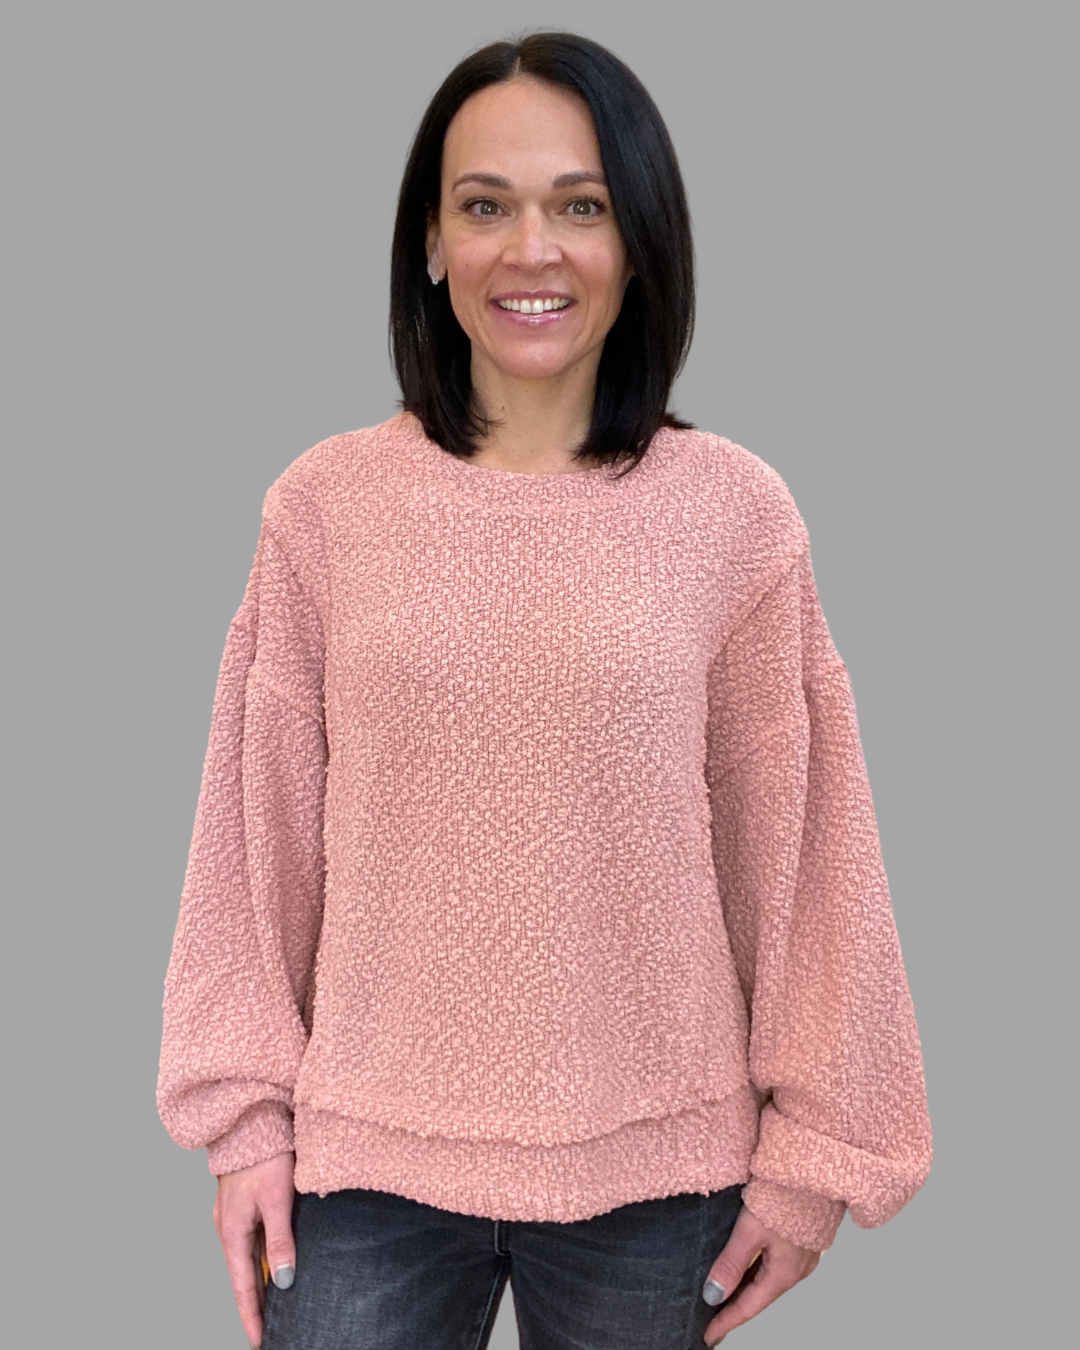 knit textured top in blush